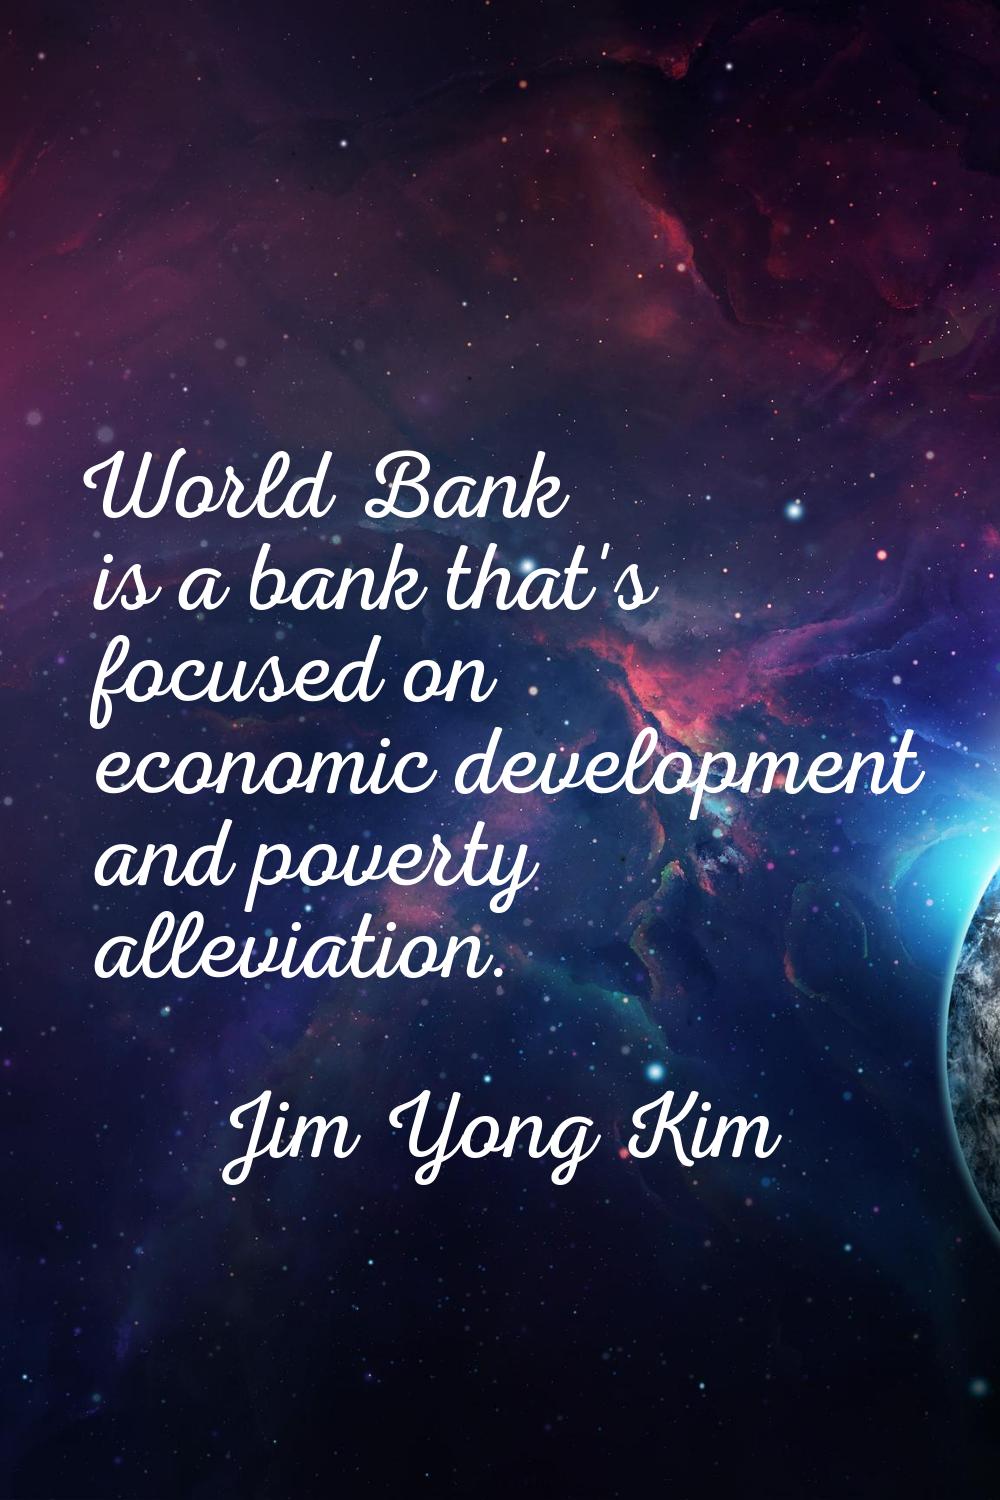 World Bank is a bank that's focused on economic development and poverty alleviation.